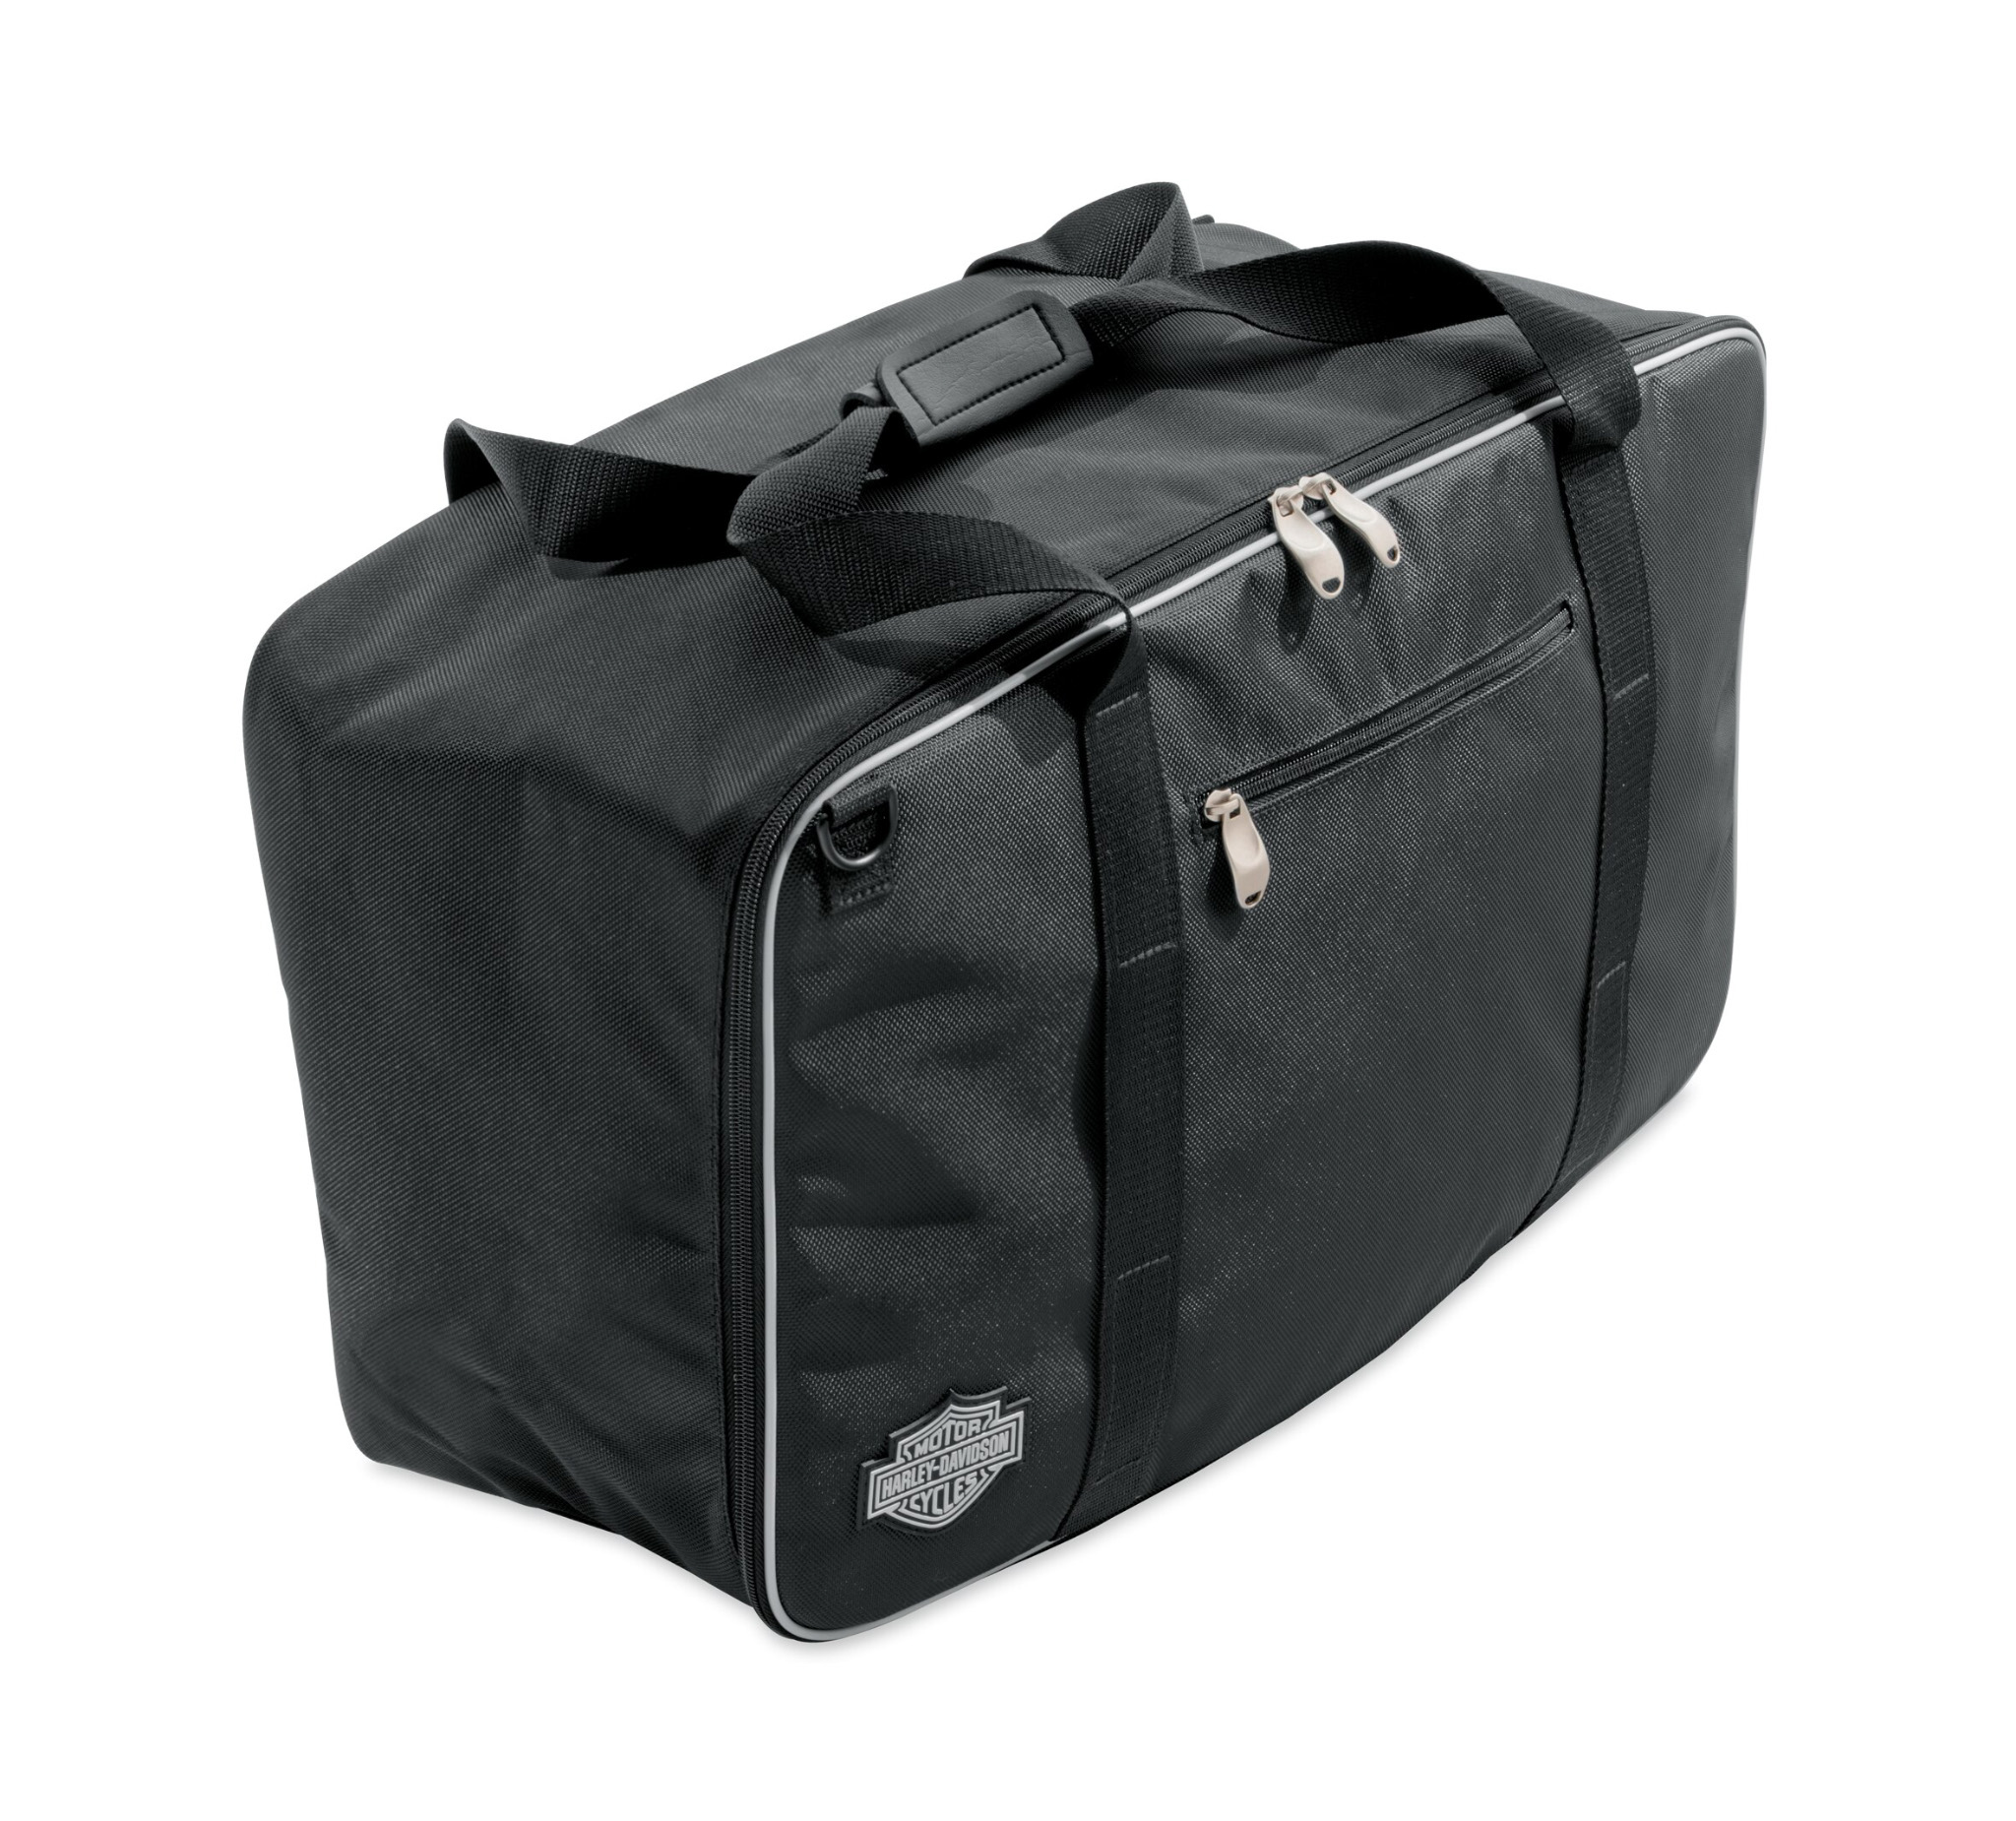 DELUXE CARRY BAG - STACYC